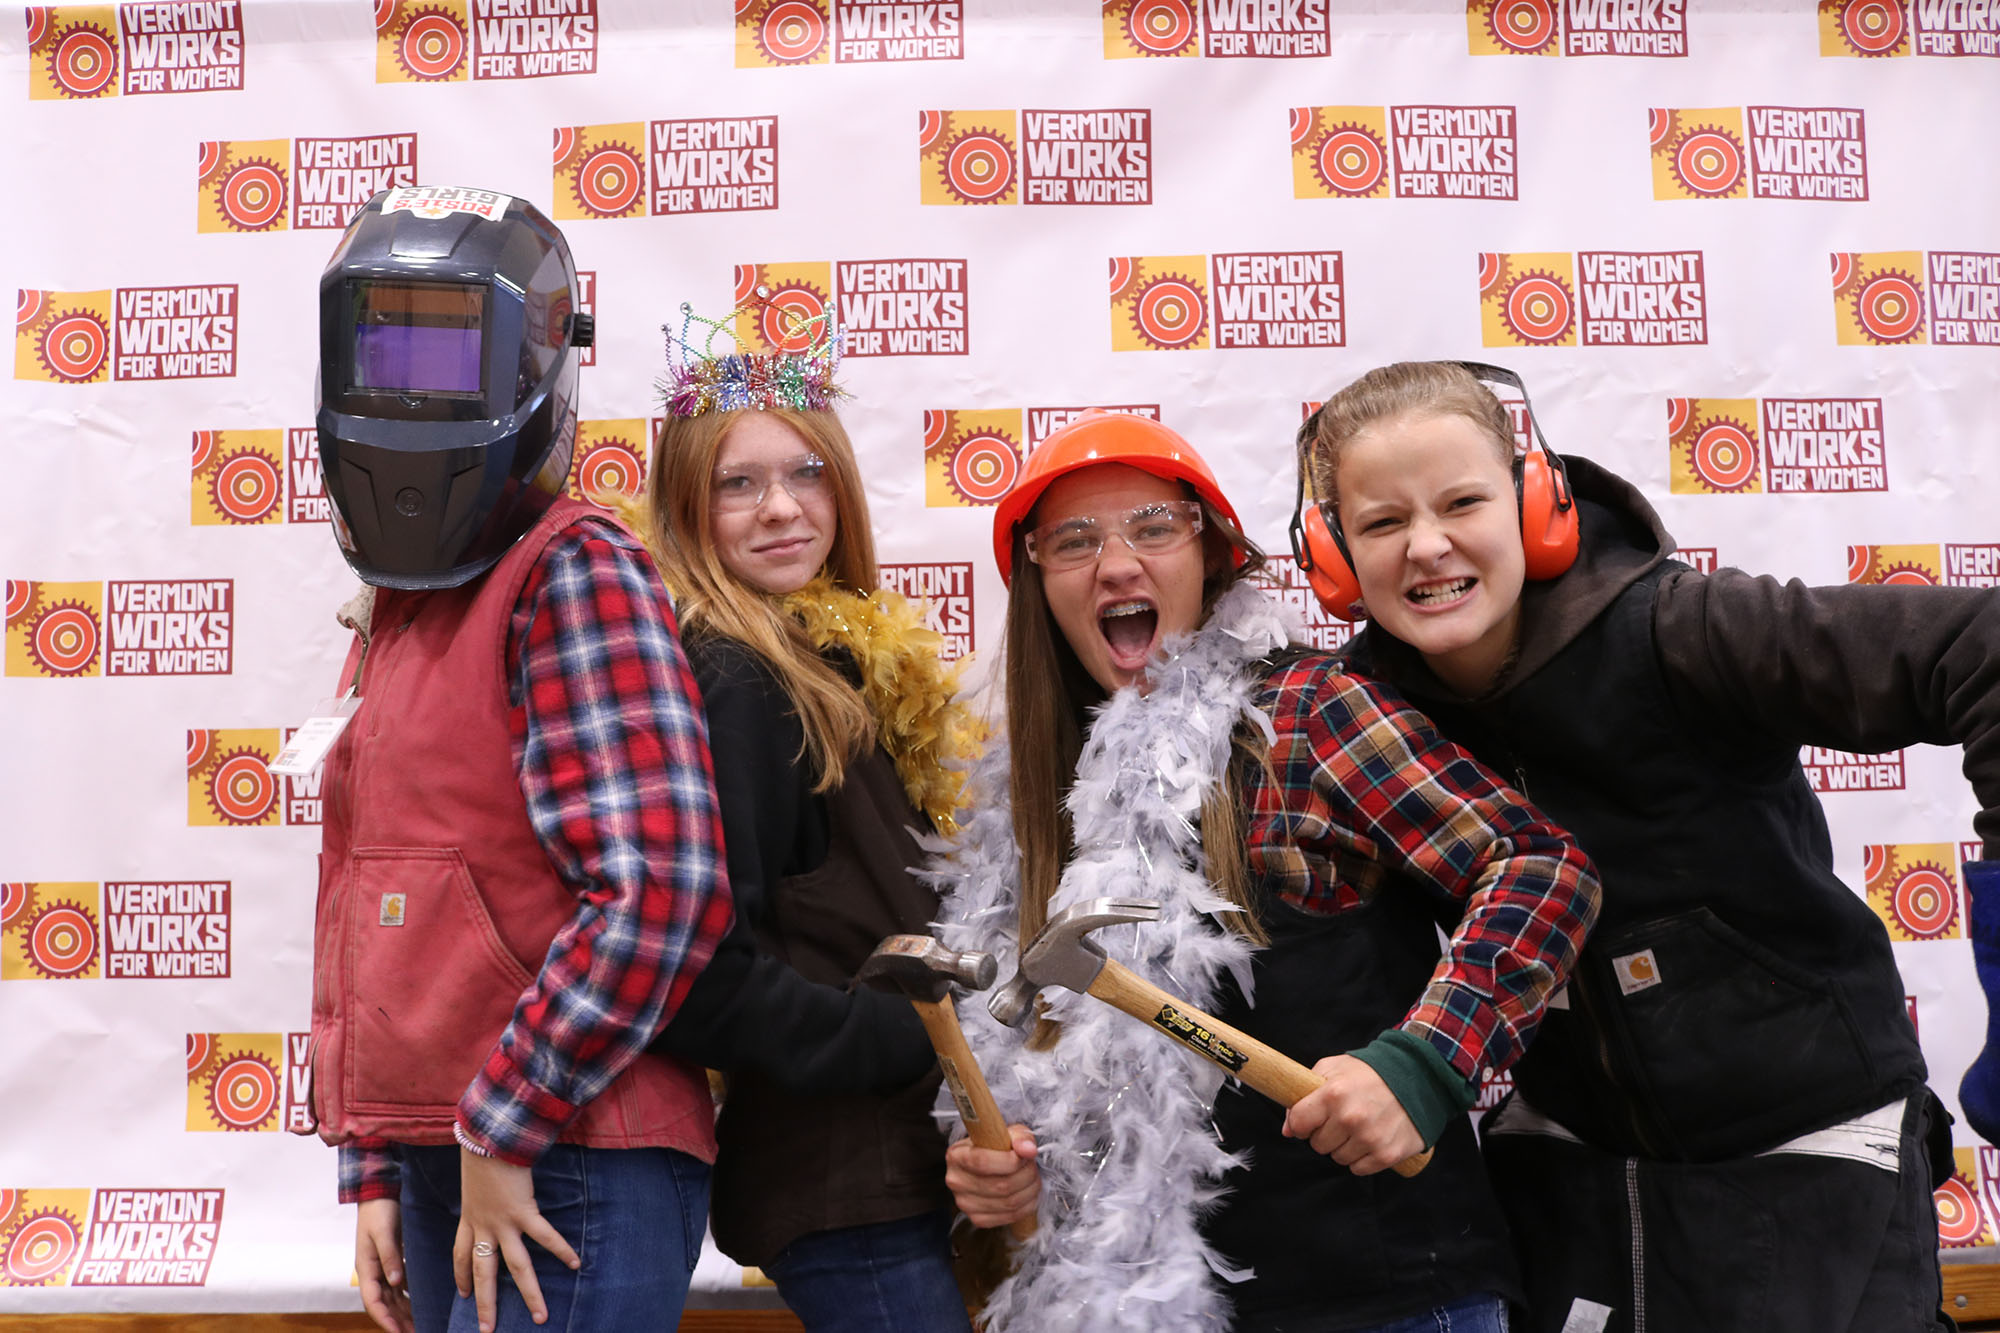 Students pose in photo booth wearing costumes and construction gear at Women Can Do.